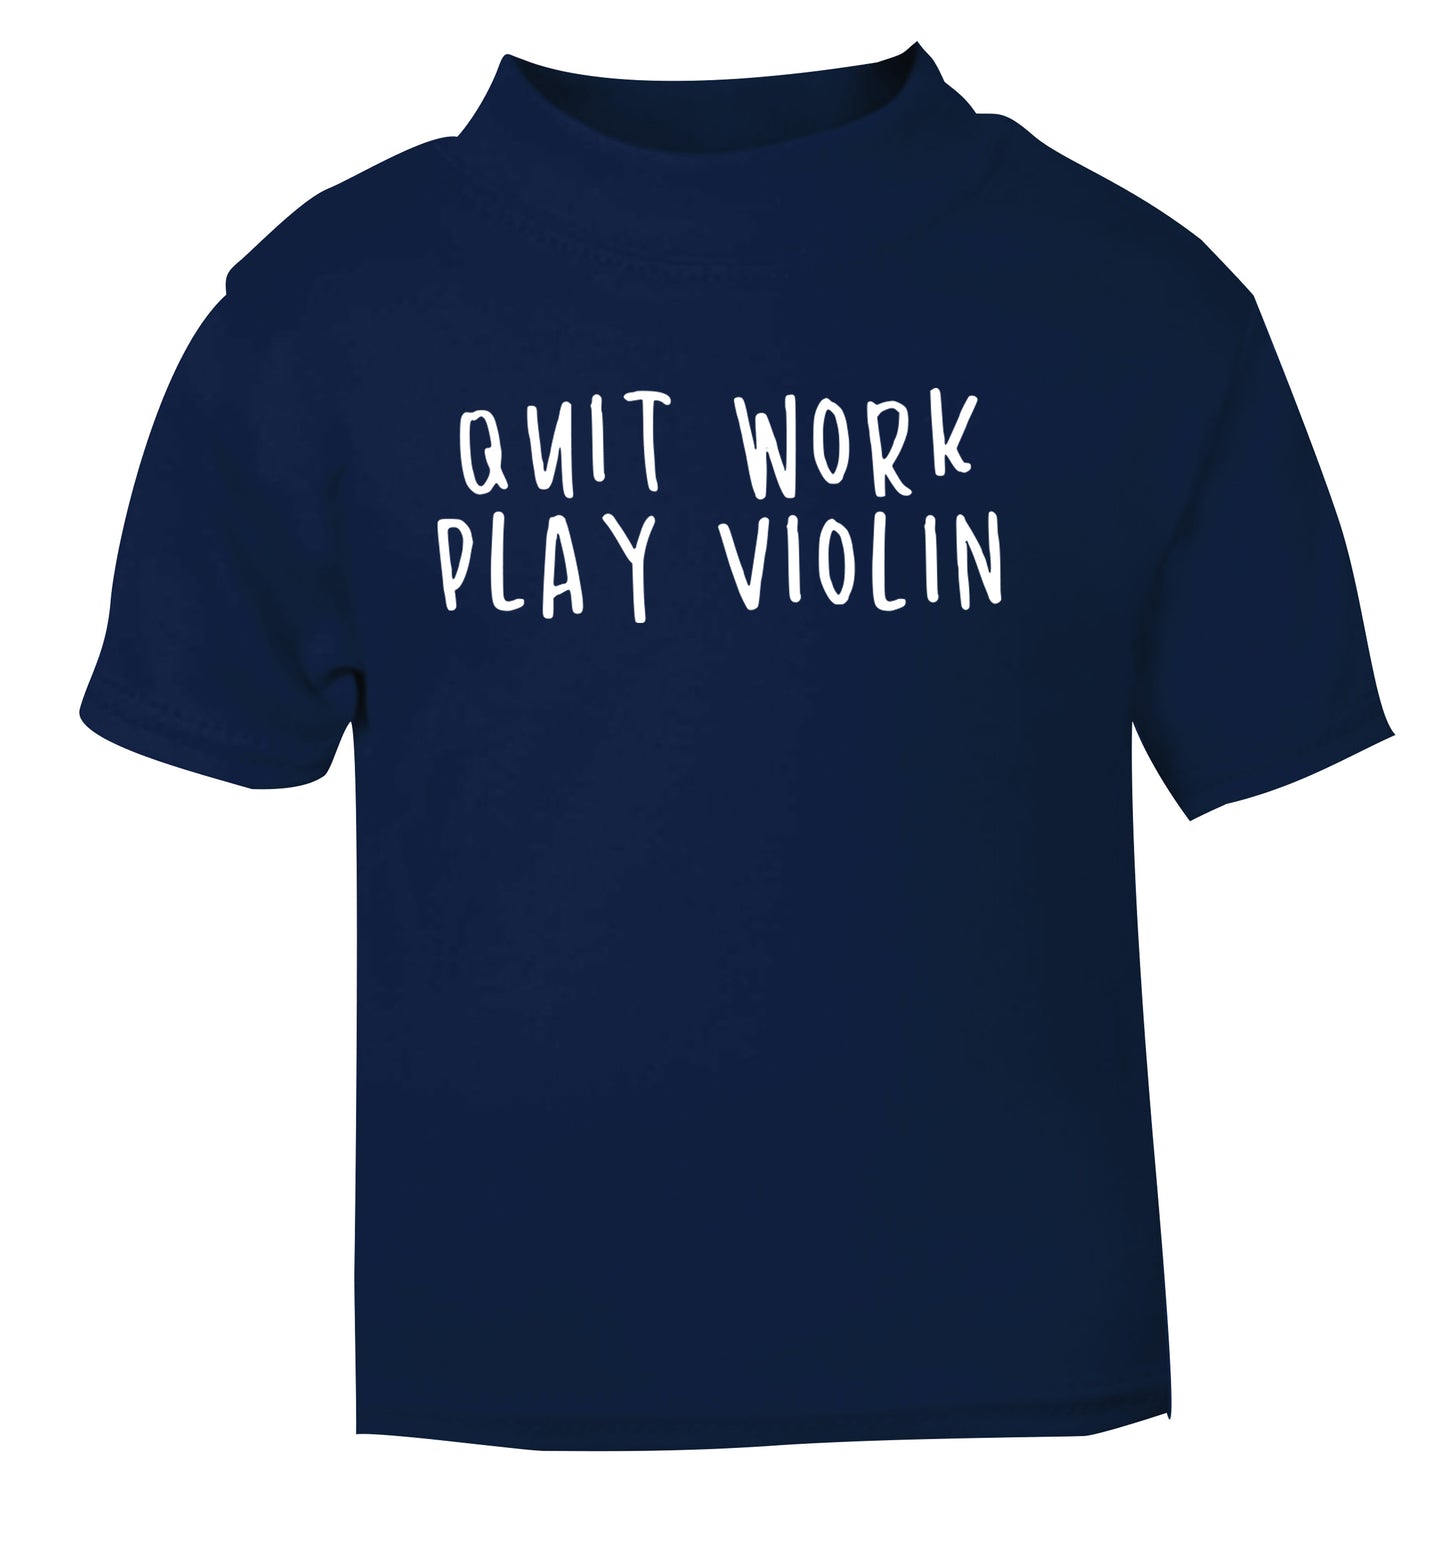 Quit work play violin navy Baby Toddler Tshirt 2 Years